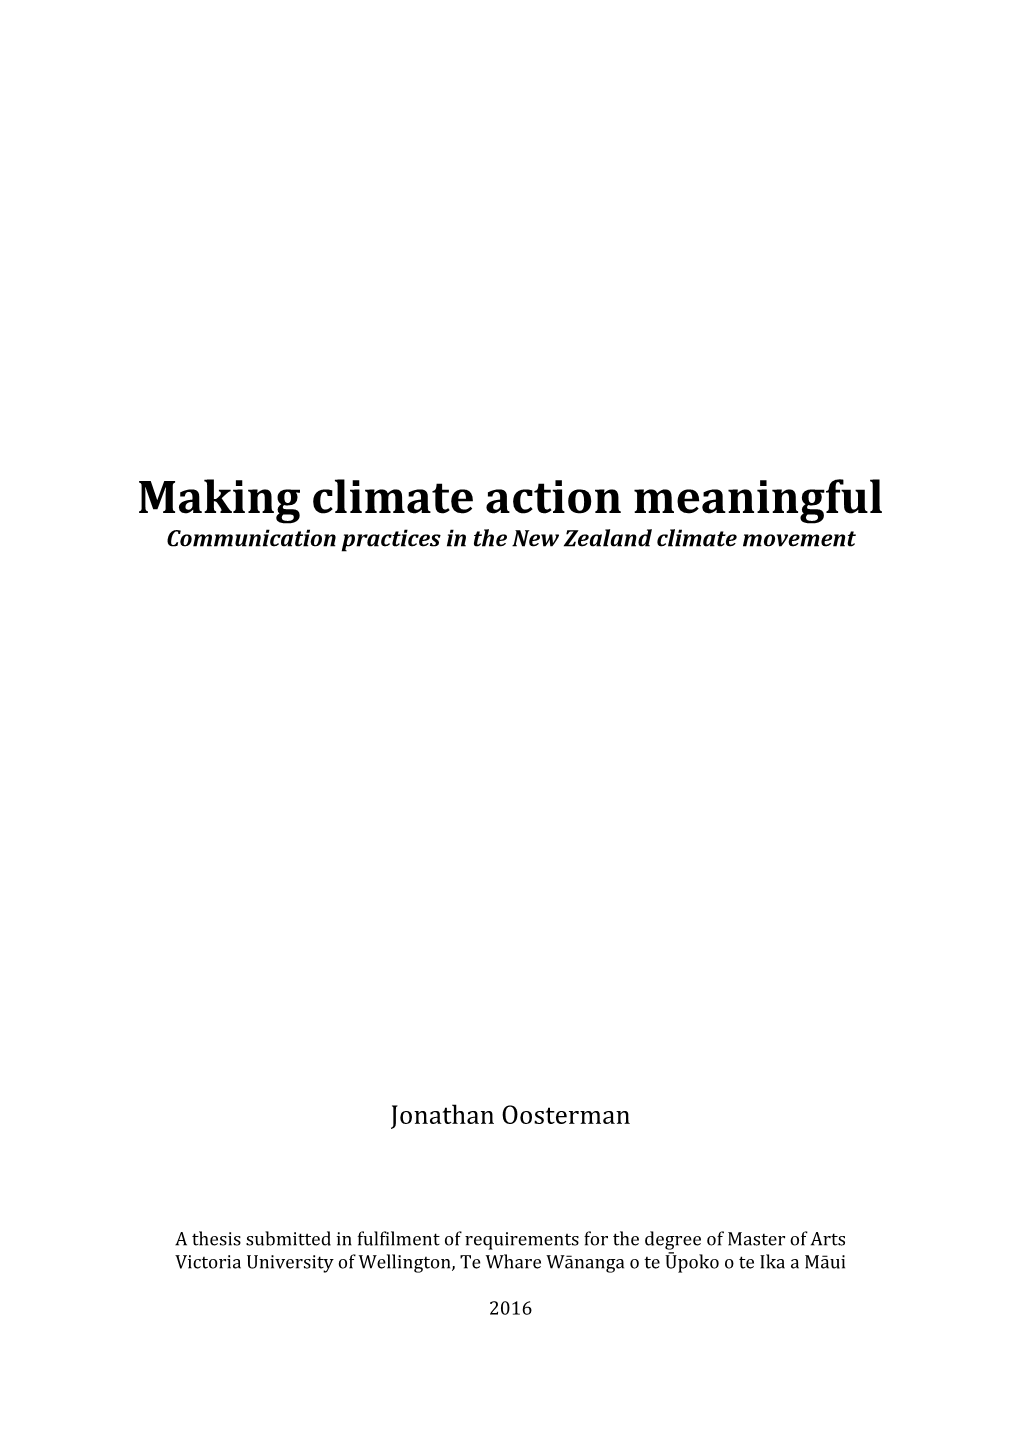 Making Climate Action Meaningful Communication Practices in the New Zealand Climate Movement